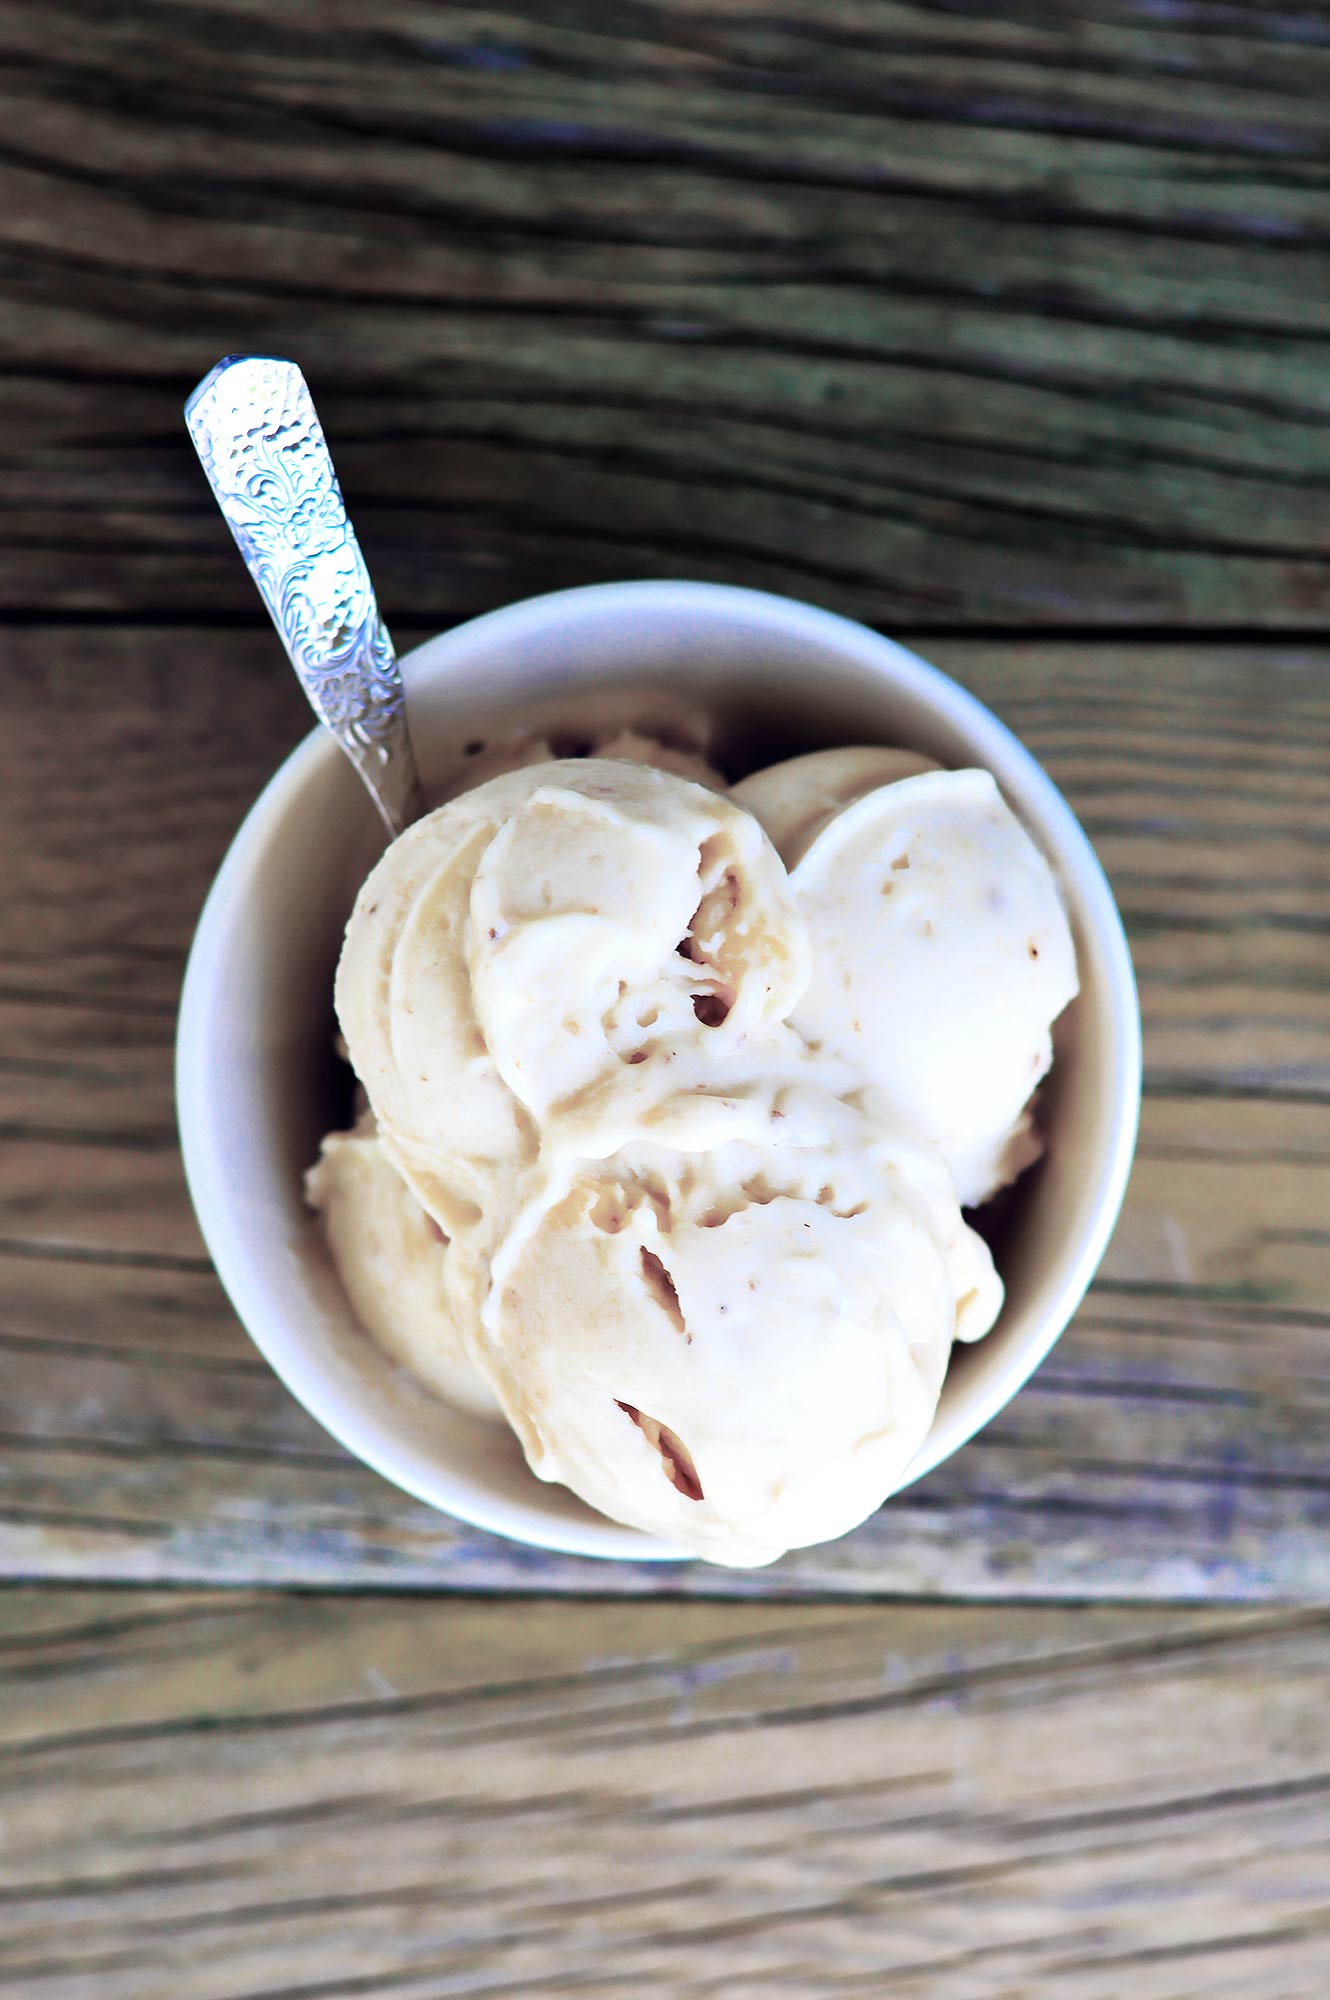 Banana Icecream with Carob Syrup - high in nutritients and low in fat! |www.thebrightbird.com